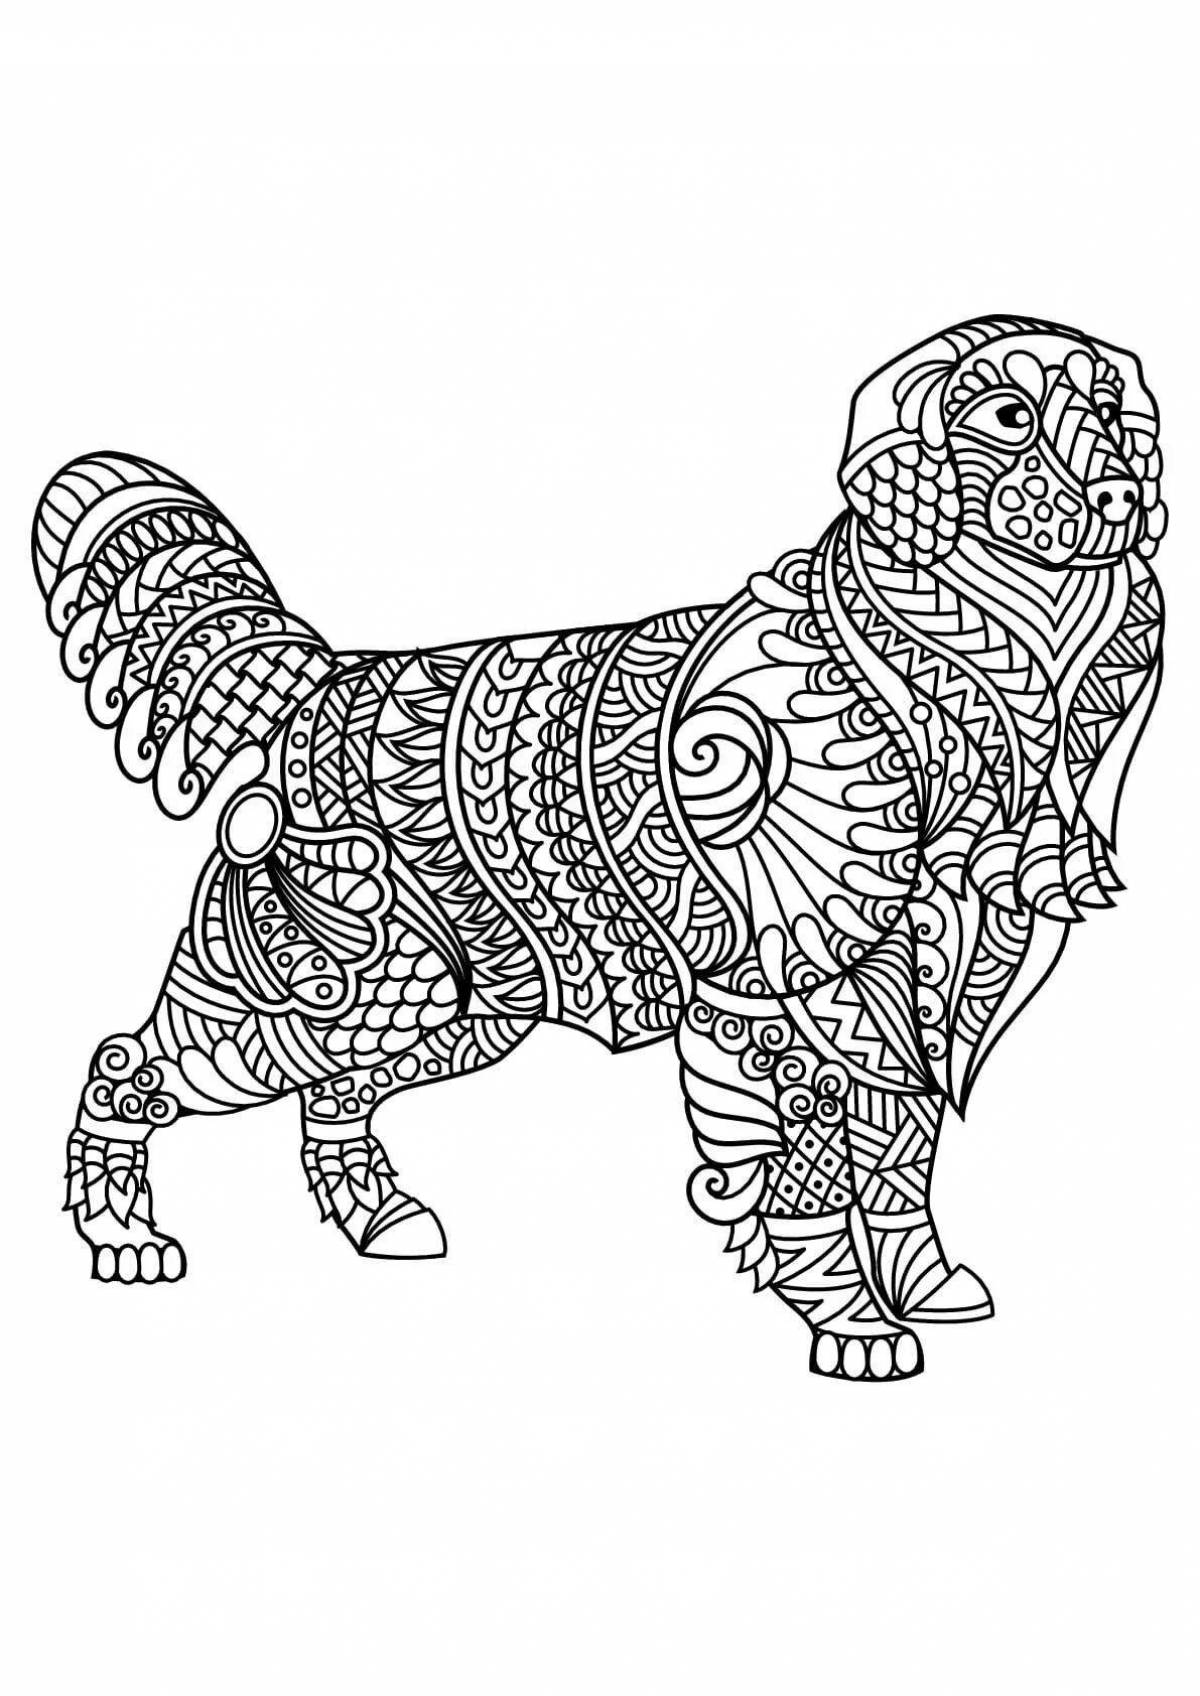 Joyful dog coloring pages for adults